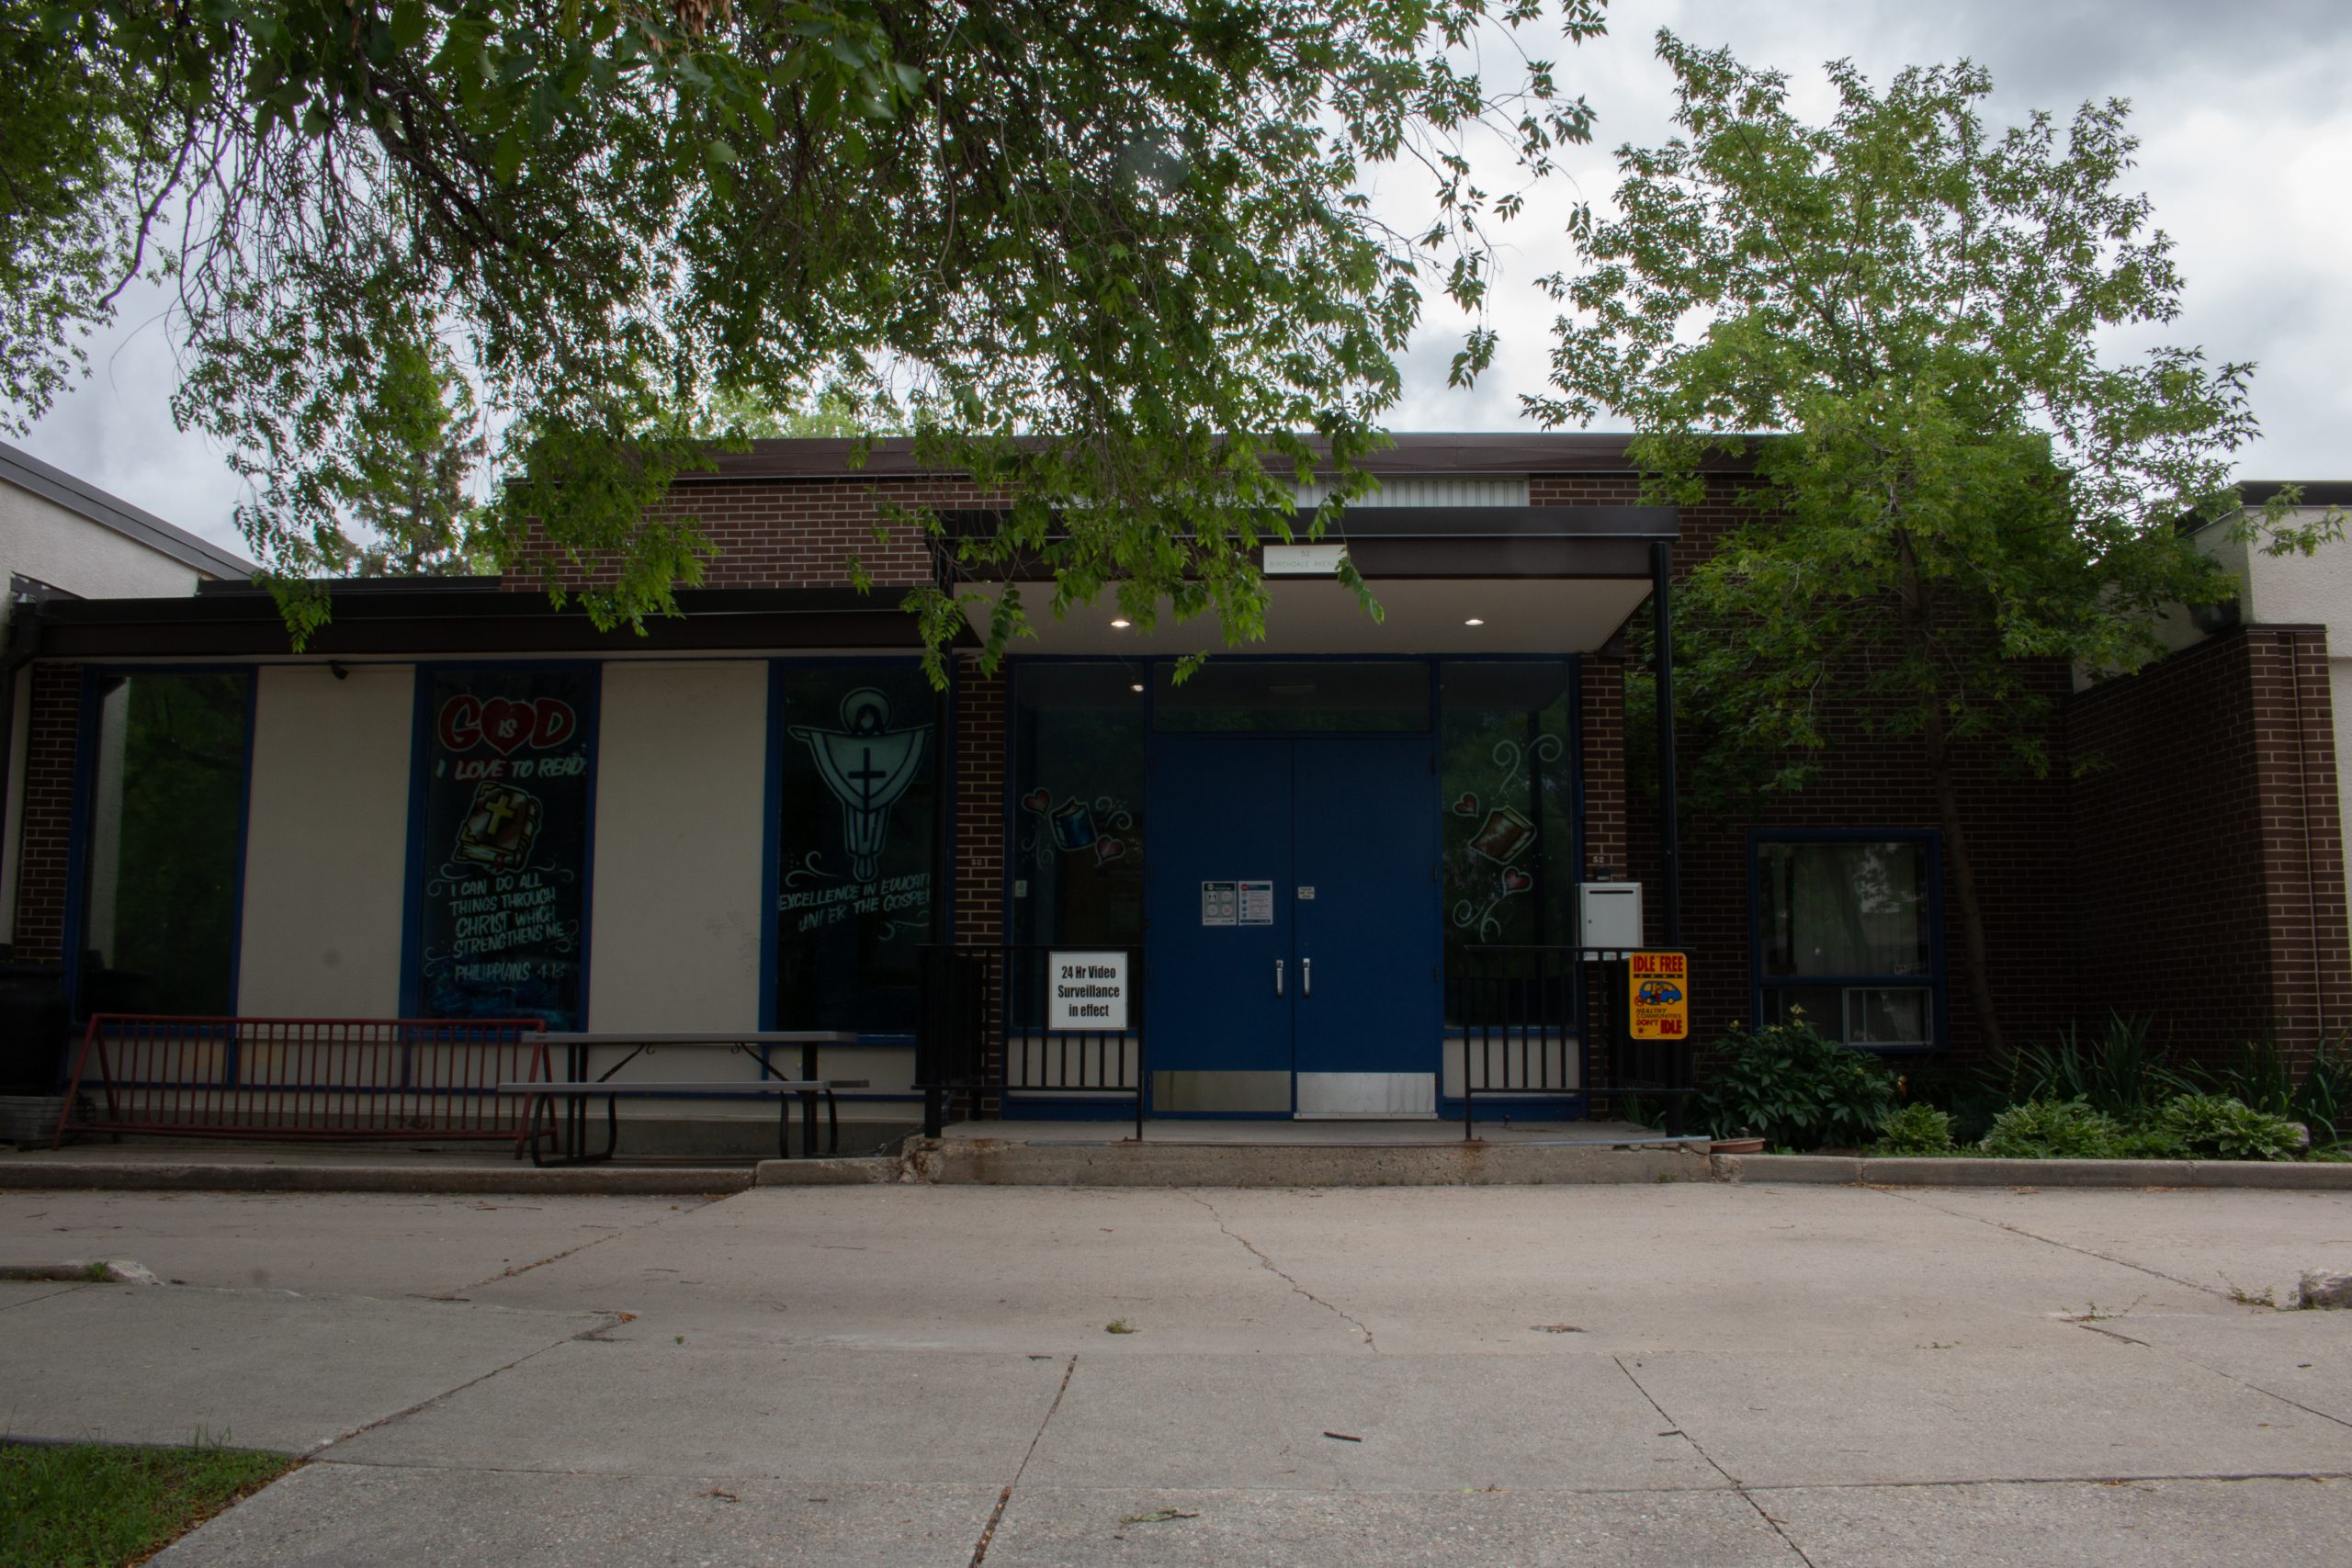 Photo of the entrance to Beautiful Saviour Lutheran School at 52 Birchdale Avenue